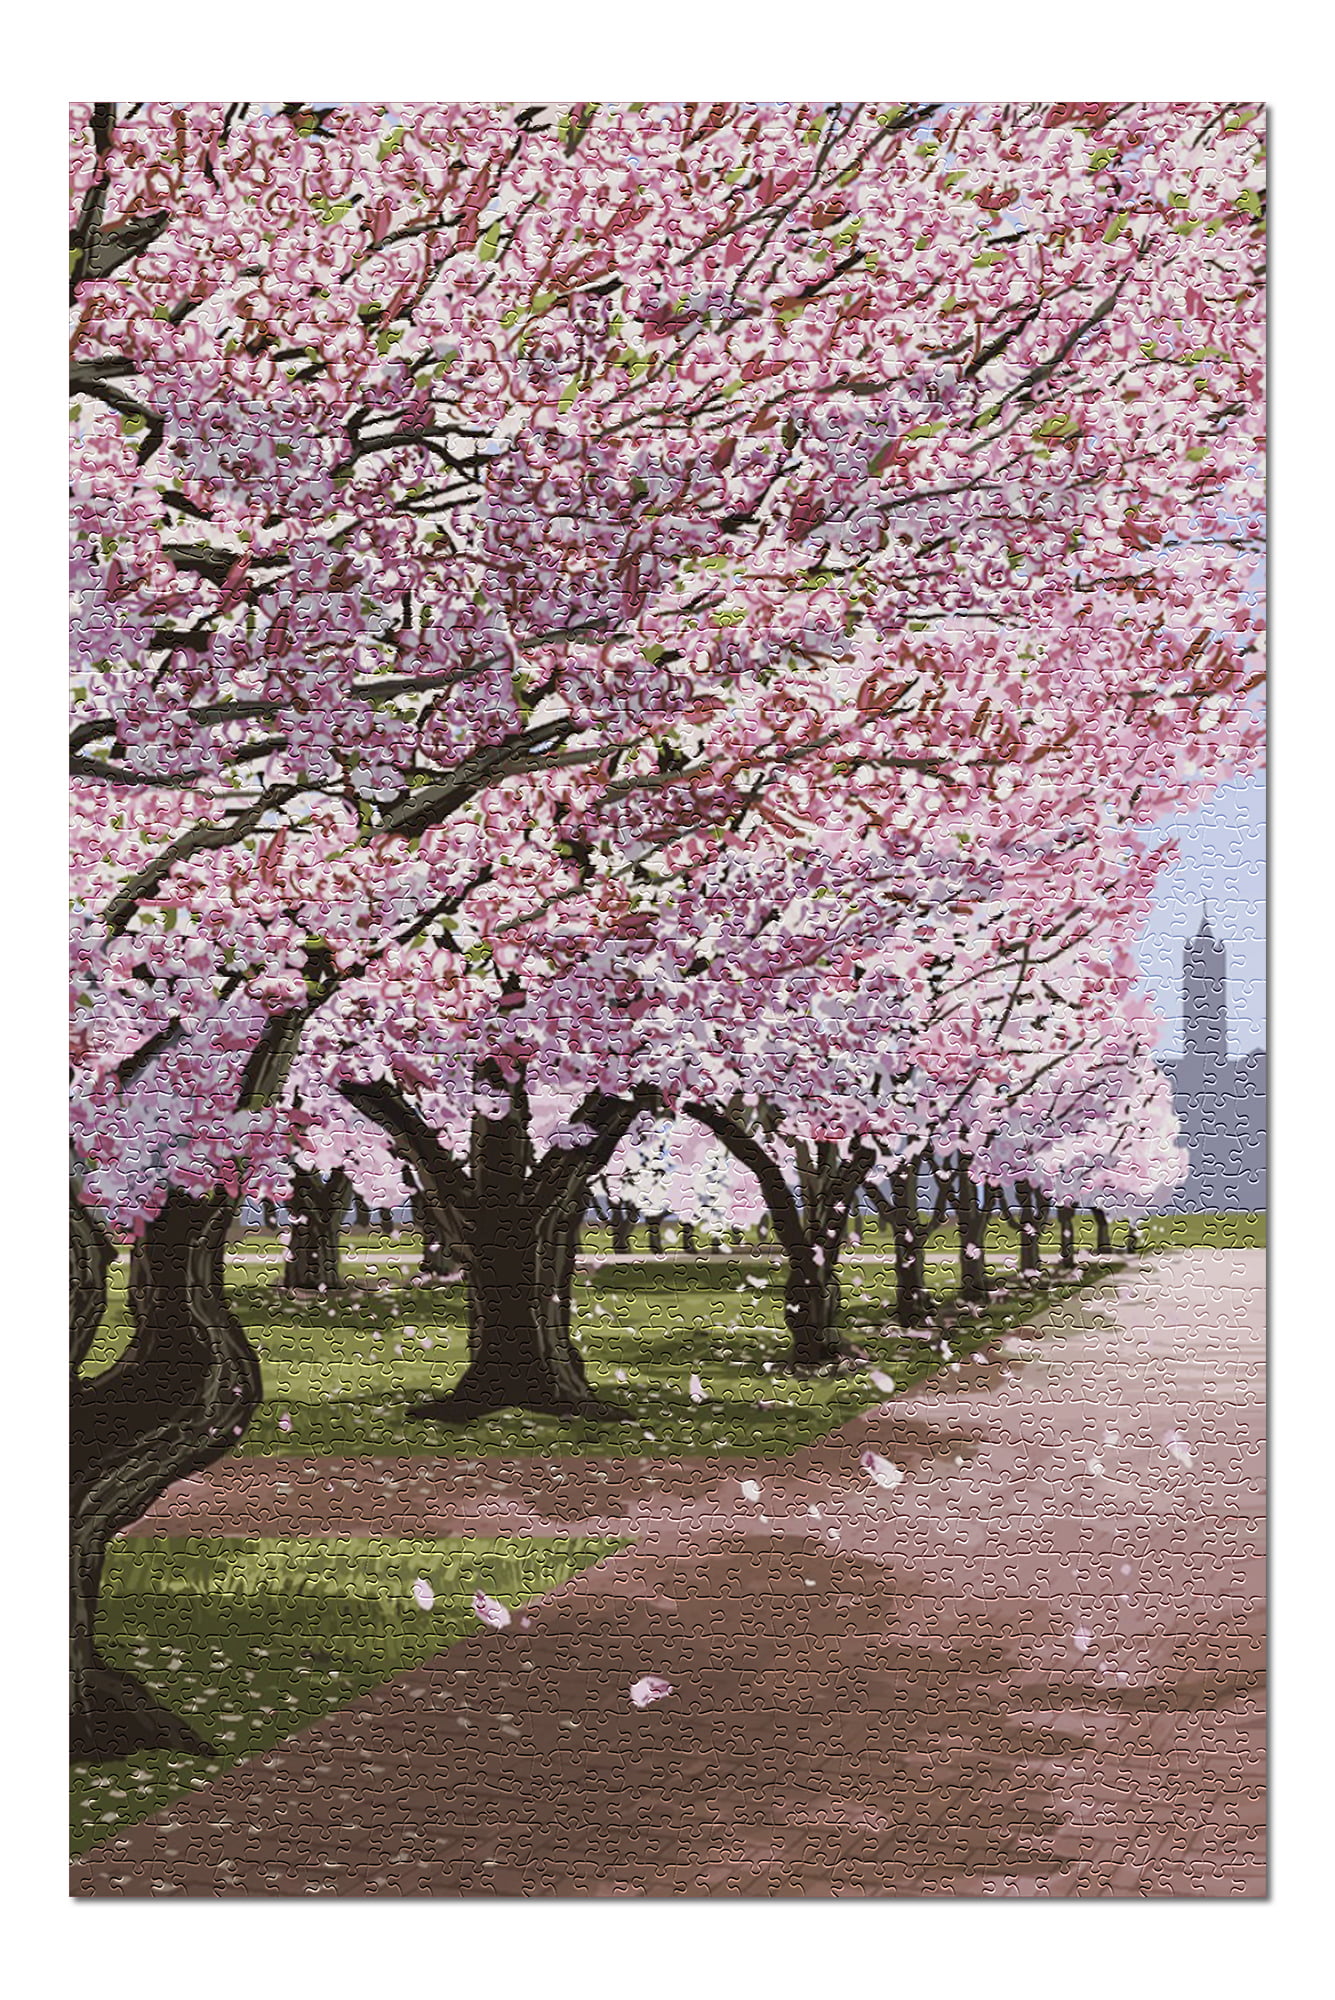 Campus Cherry Blossoms (20x30 Premium 1000 Piece Jigsaw Puzzle, Made in